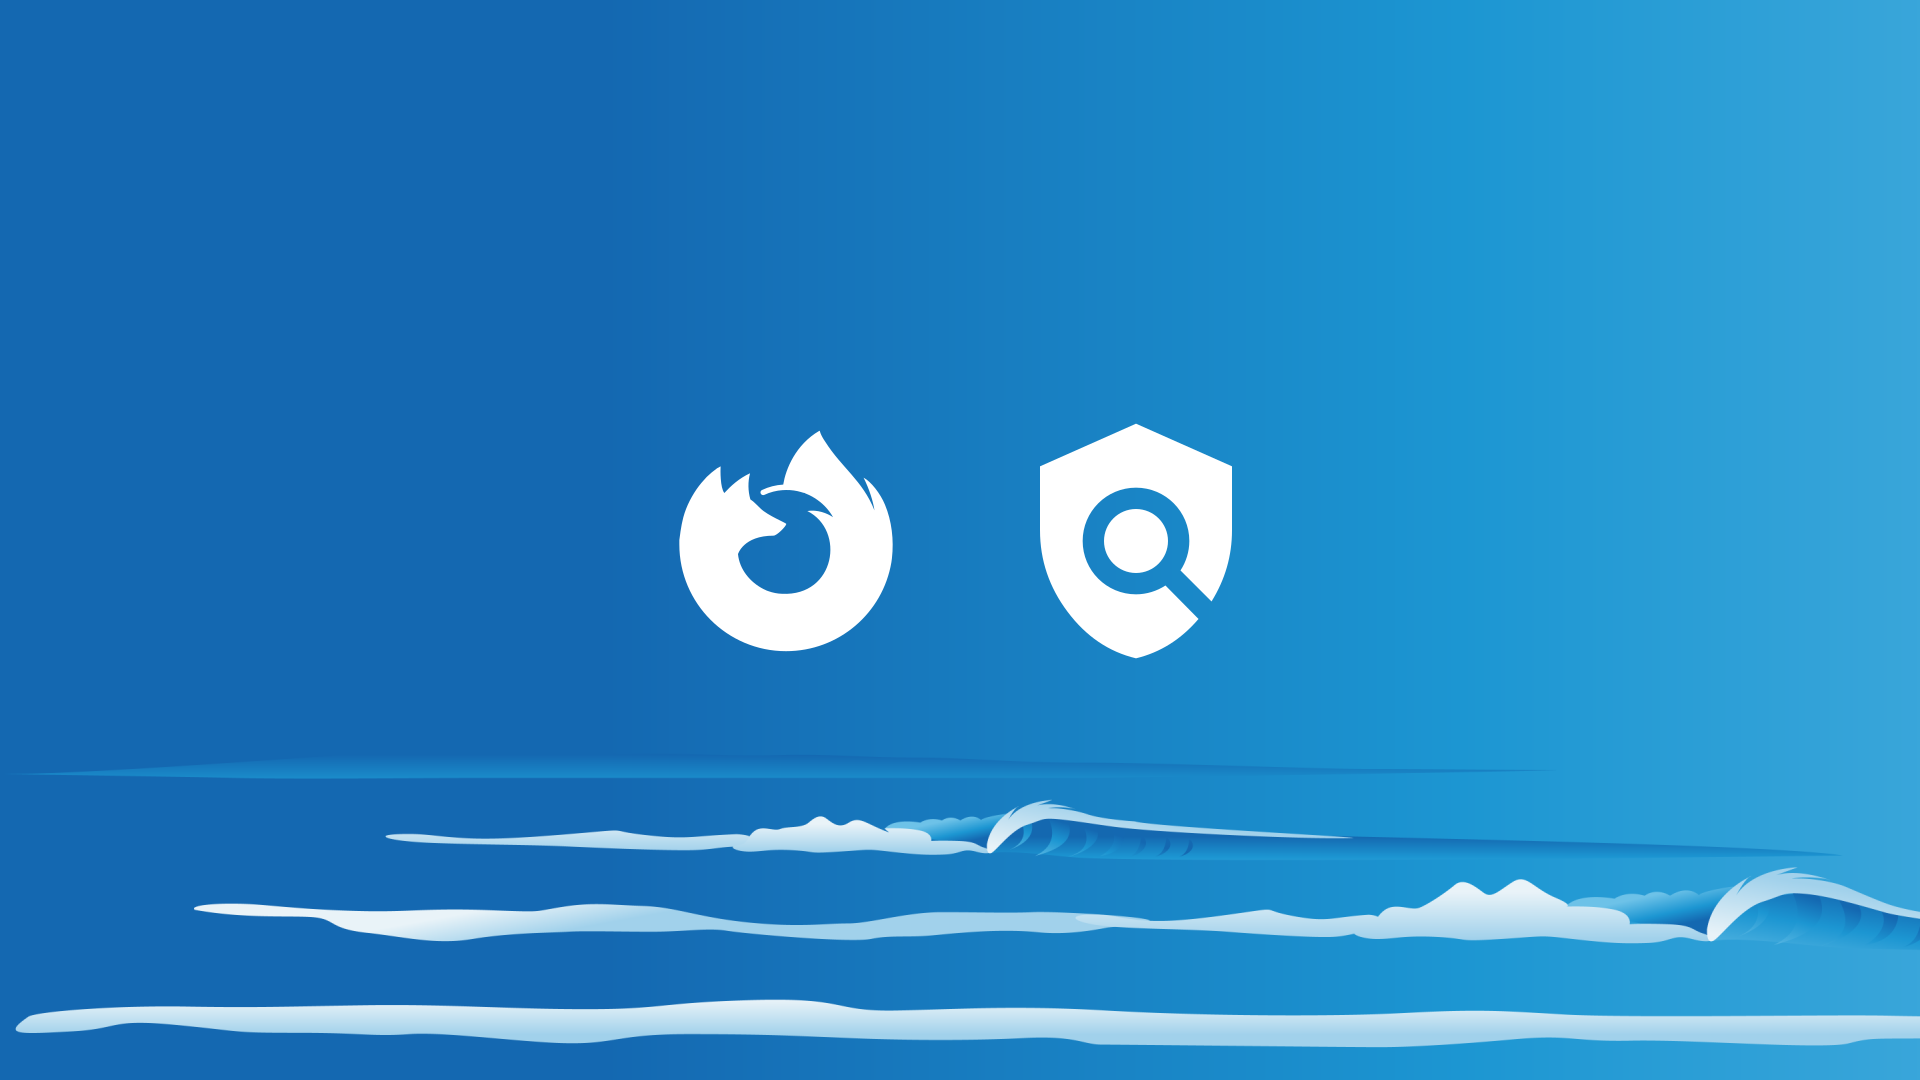 Sea background with Firefox icon